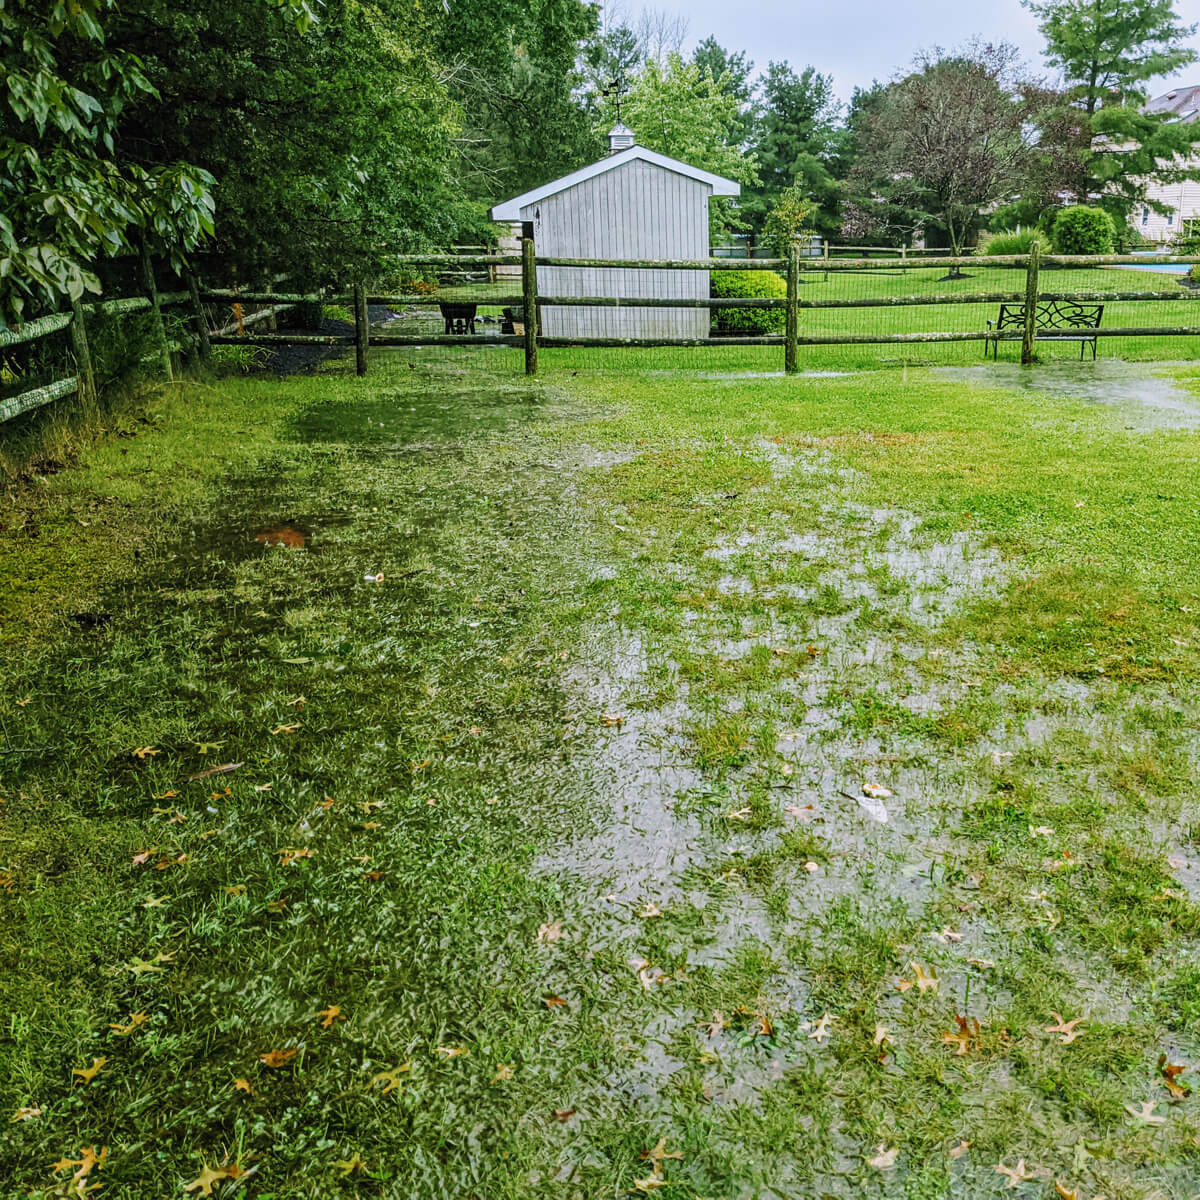 Flooded backyard in 2021 after a big rain storm, standing water near neighbor's shed